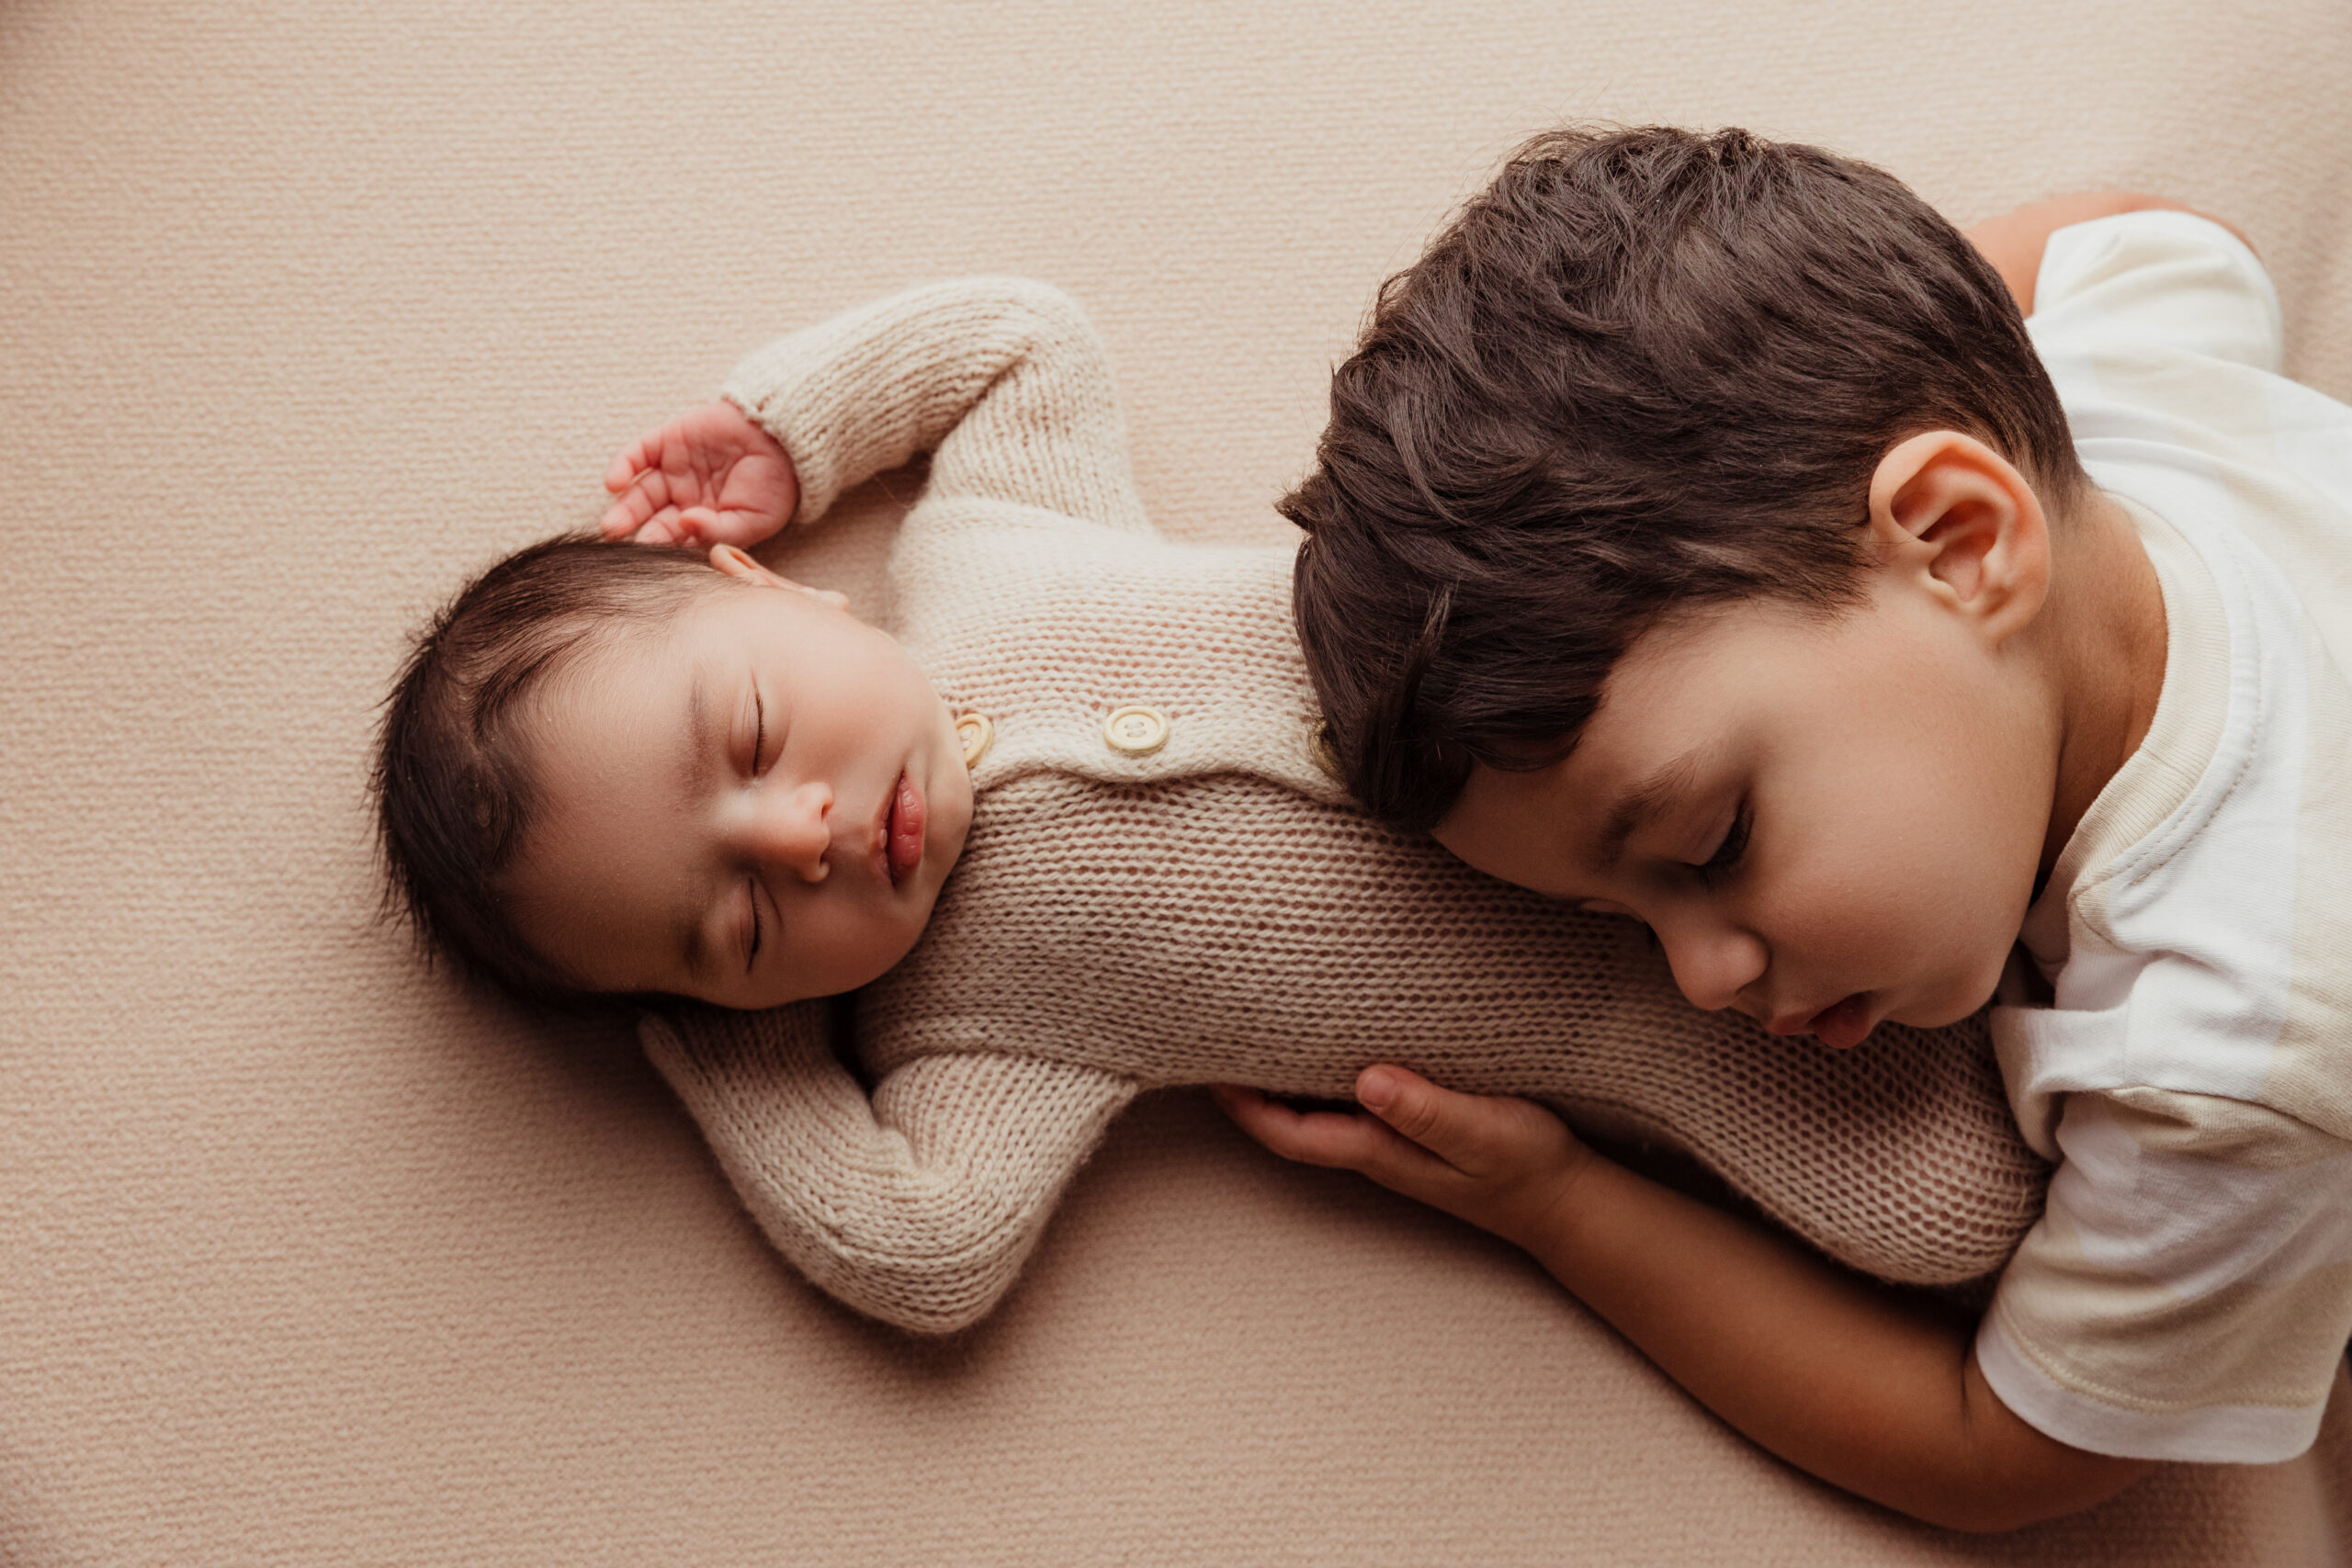 Toddler lays on baby brother for Norma Fayak Photography